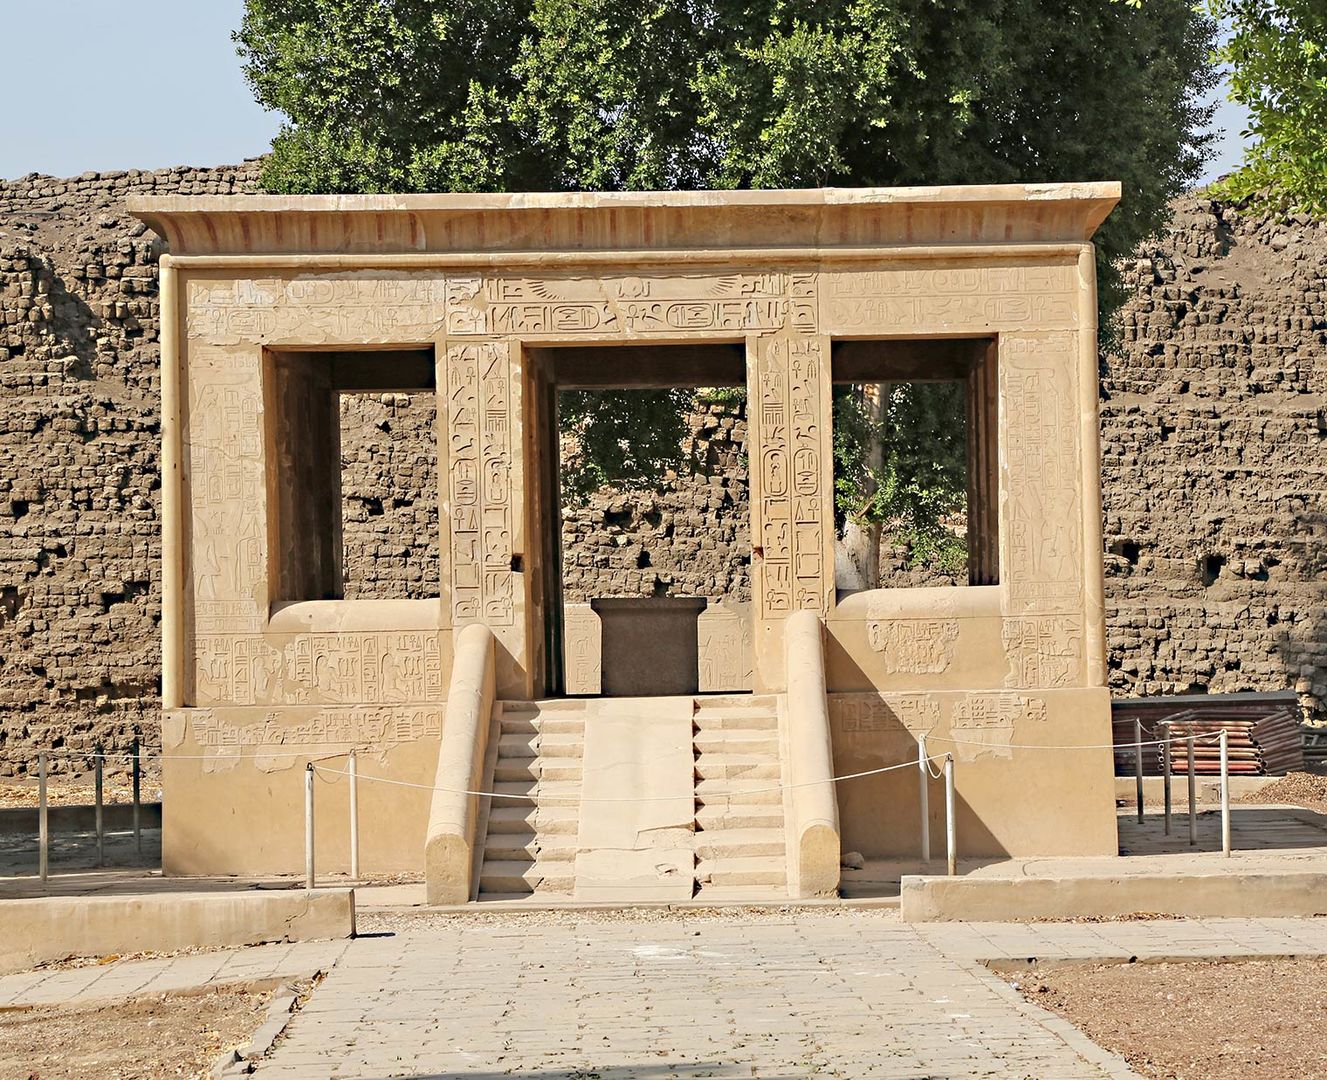 Square building with a ramp leading to the interior and large openings on all sides. The walls are covered with hieroglyphs.